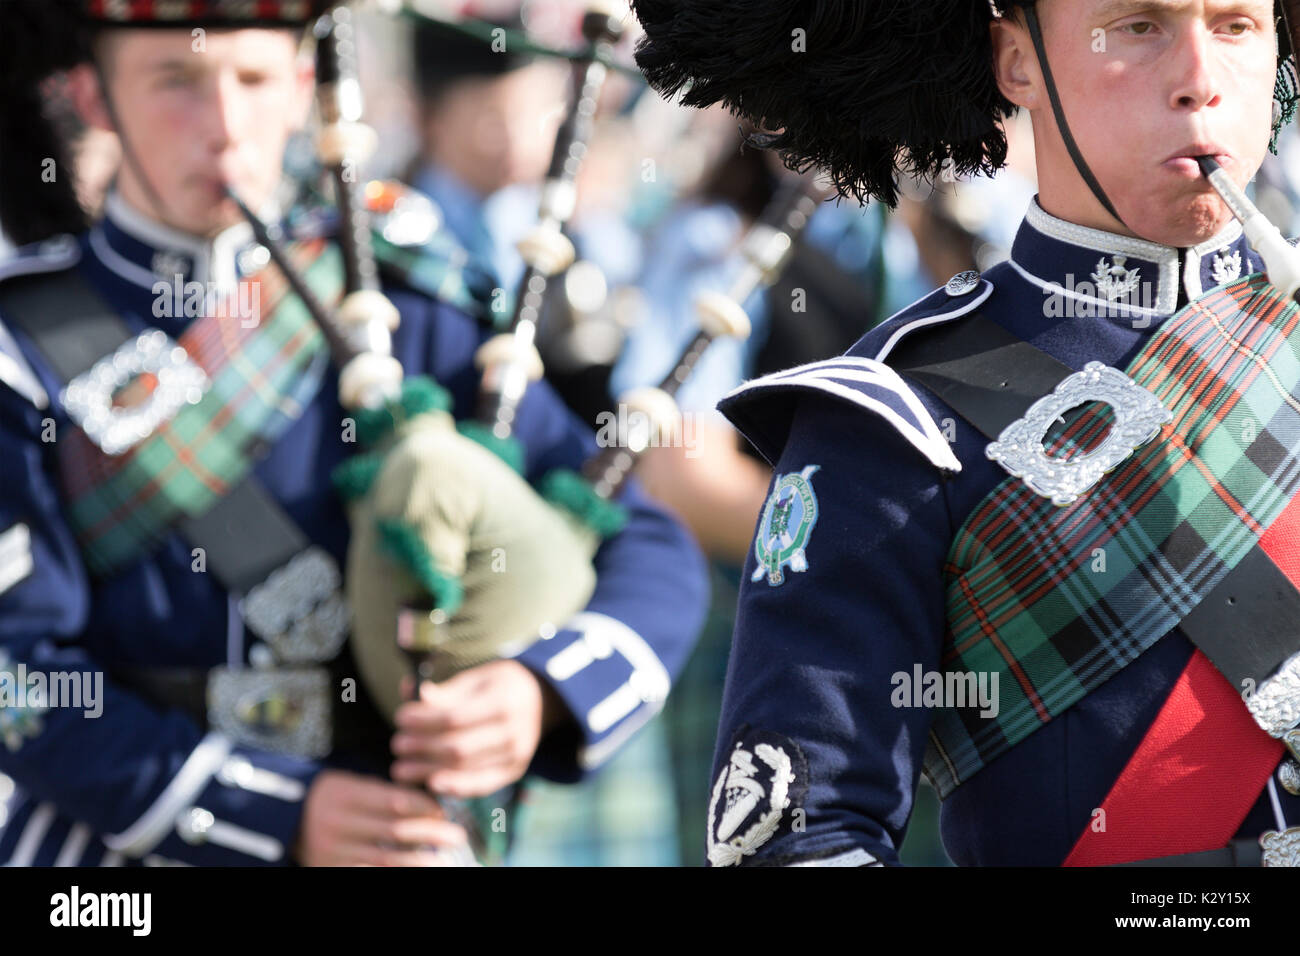 Ballater, Scotland - Aug 10, 2017: Massed Pipe Bands marching the the Highland Games event at Ballater, Scotland. Stock Photo